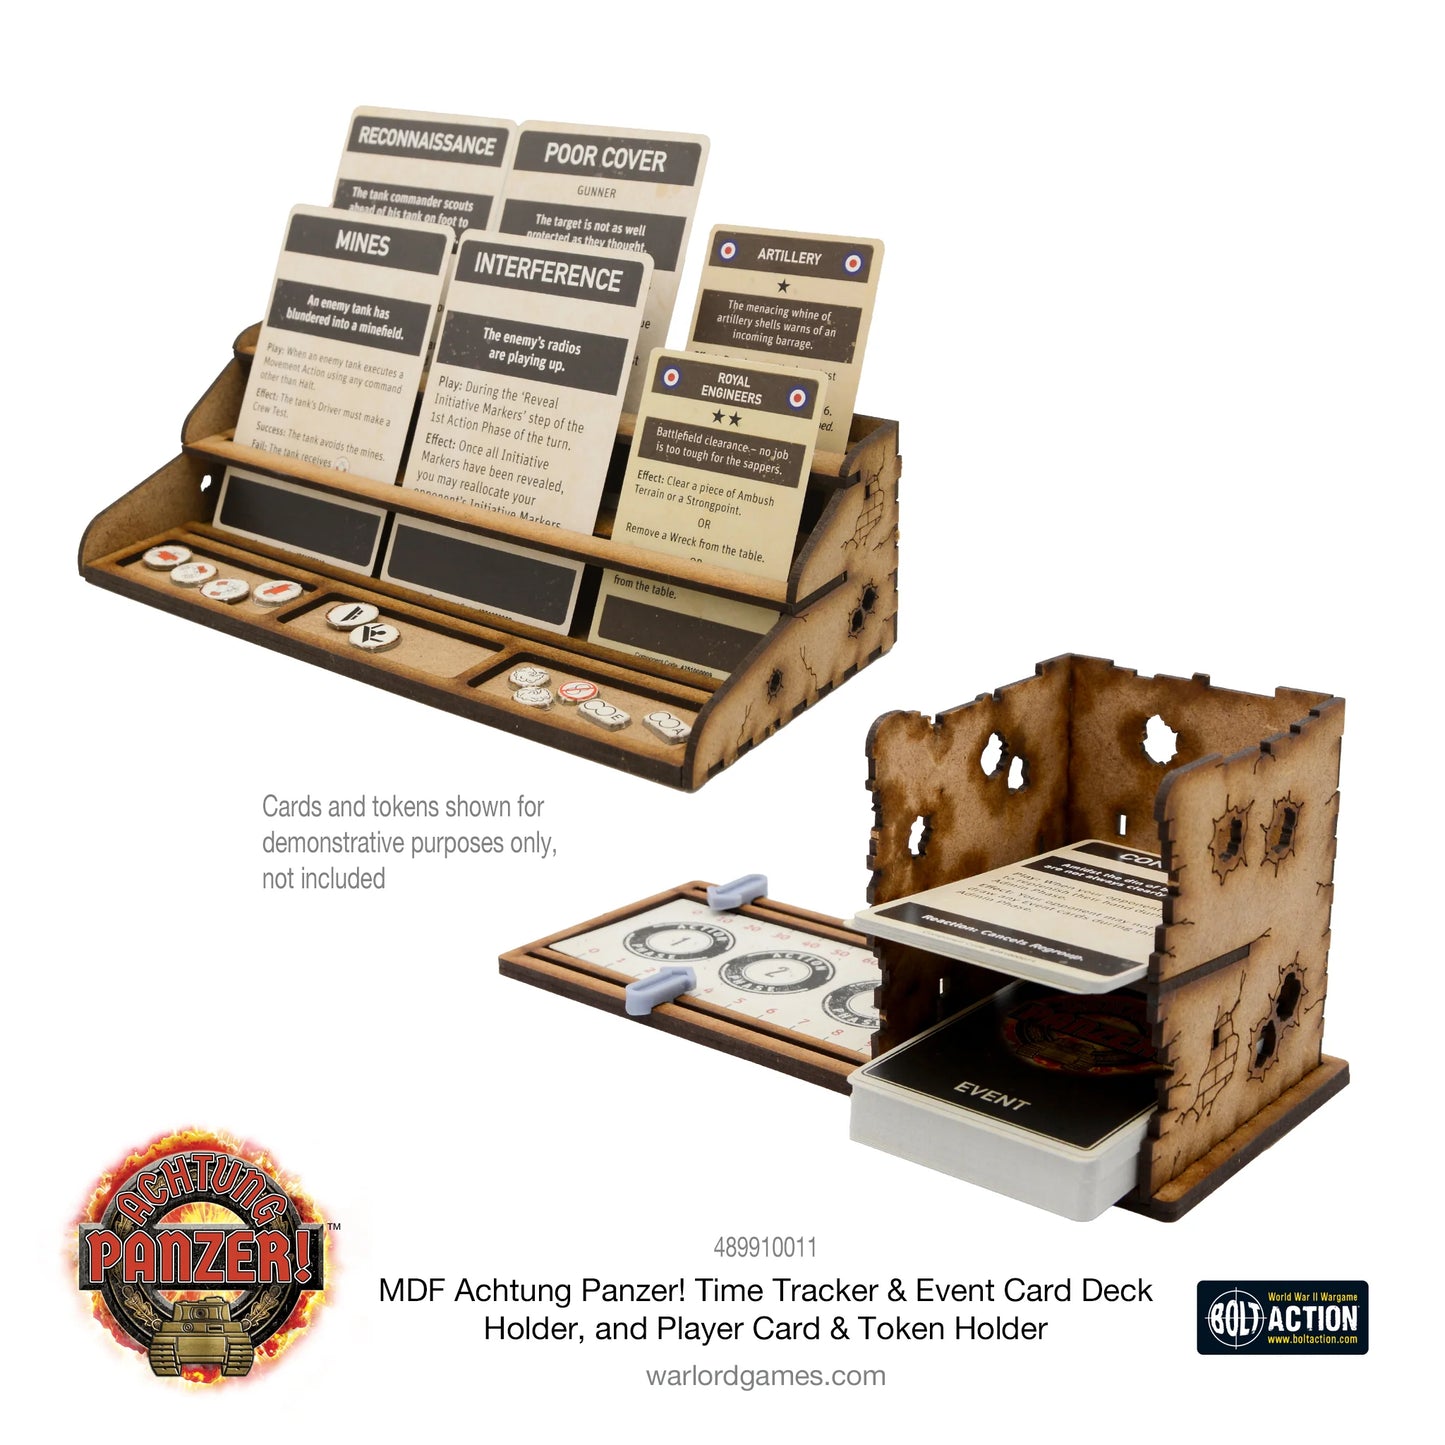 MDF Achtung Panzer! Time Tracker & Event Card Deck Holder, And Player Card & Token Holder